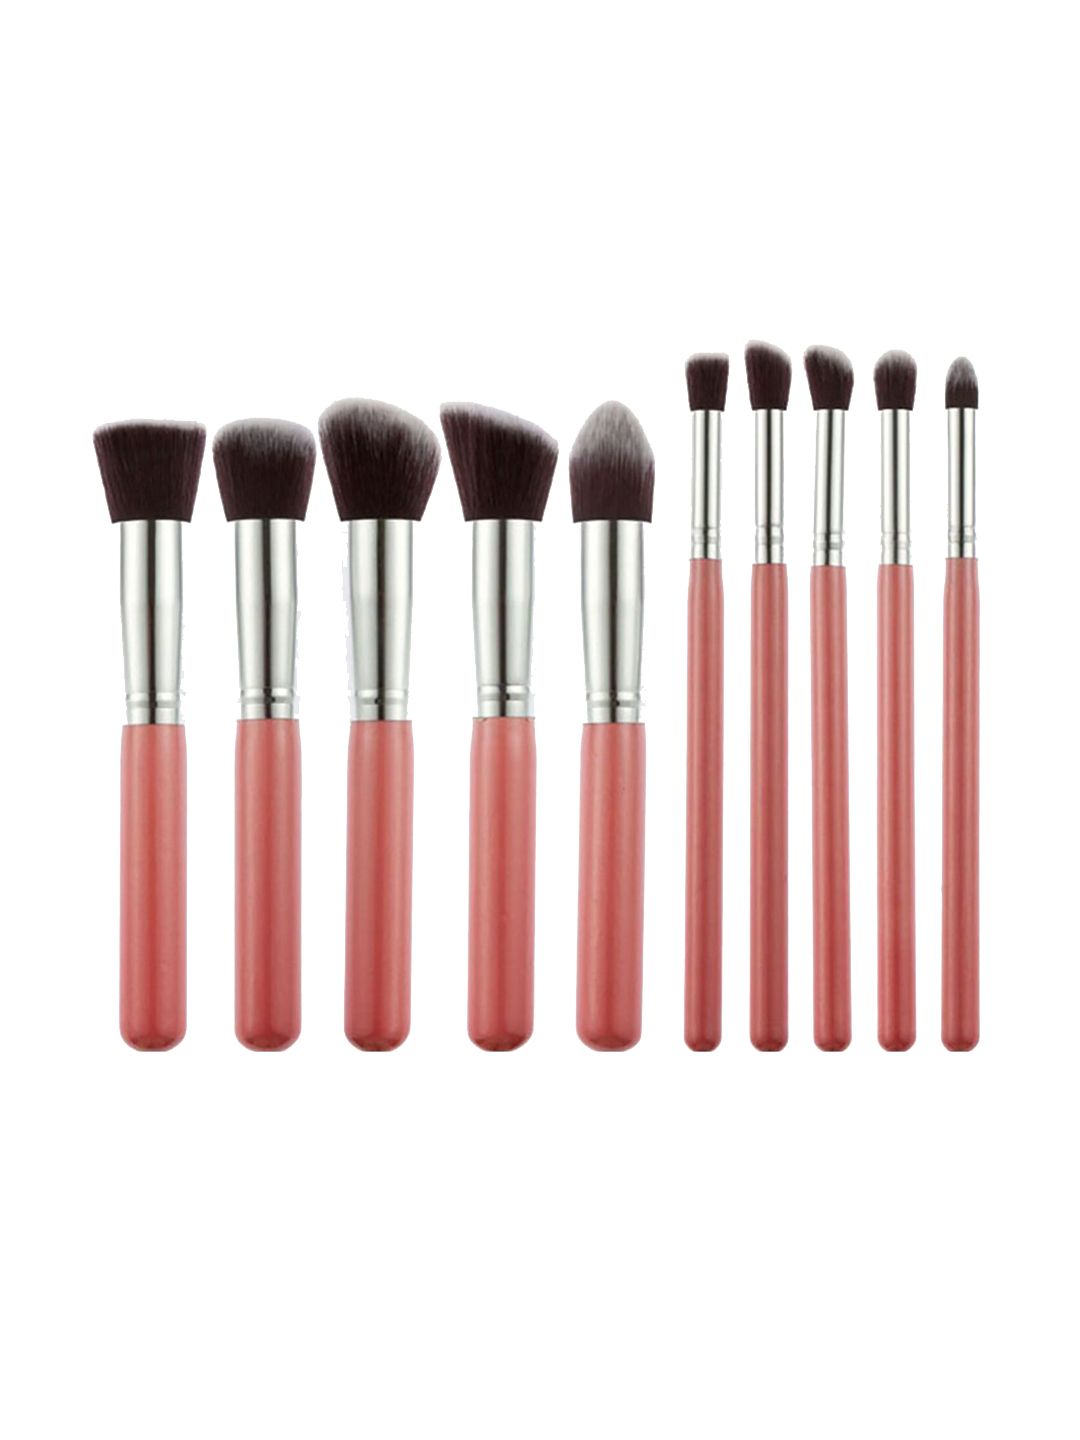 Ronzille Set of 10 Makeup Brush Applicator Price in India